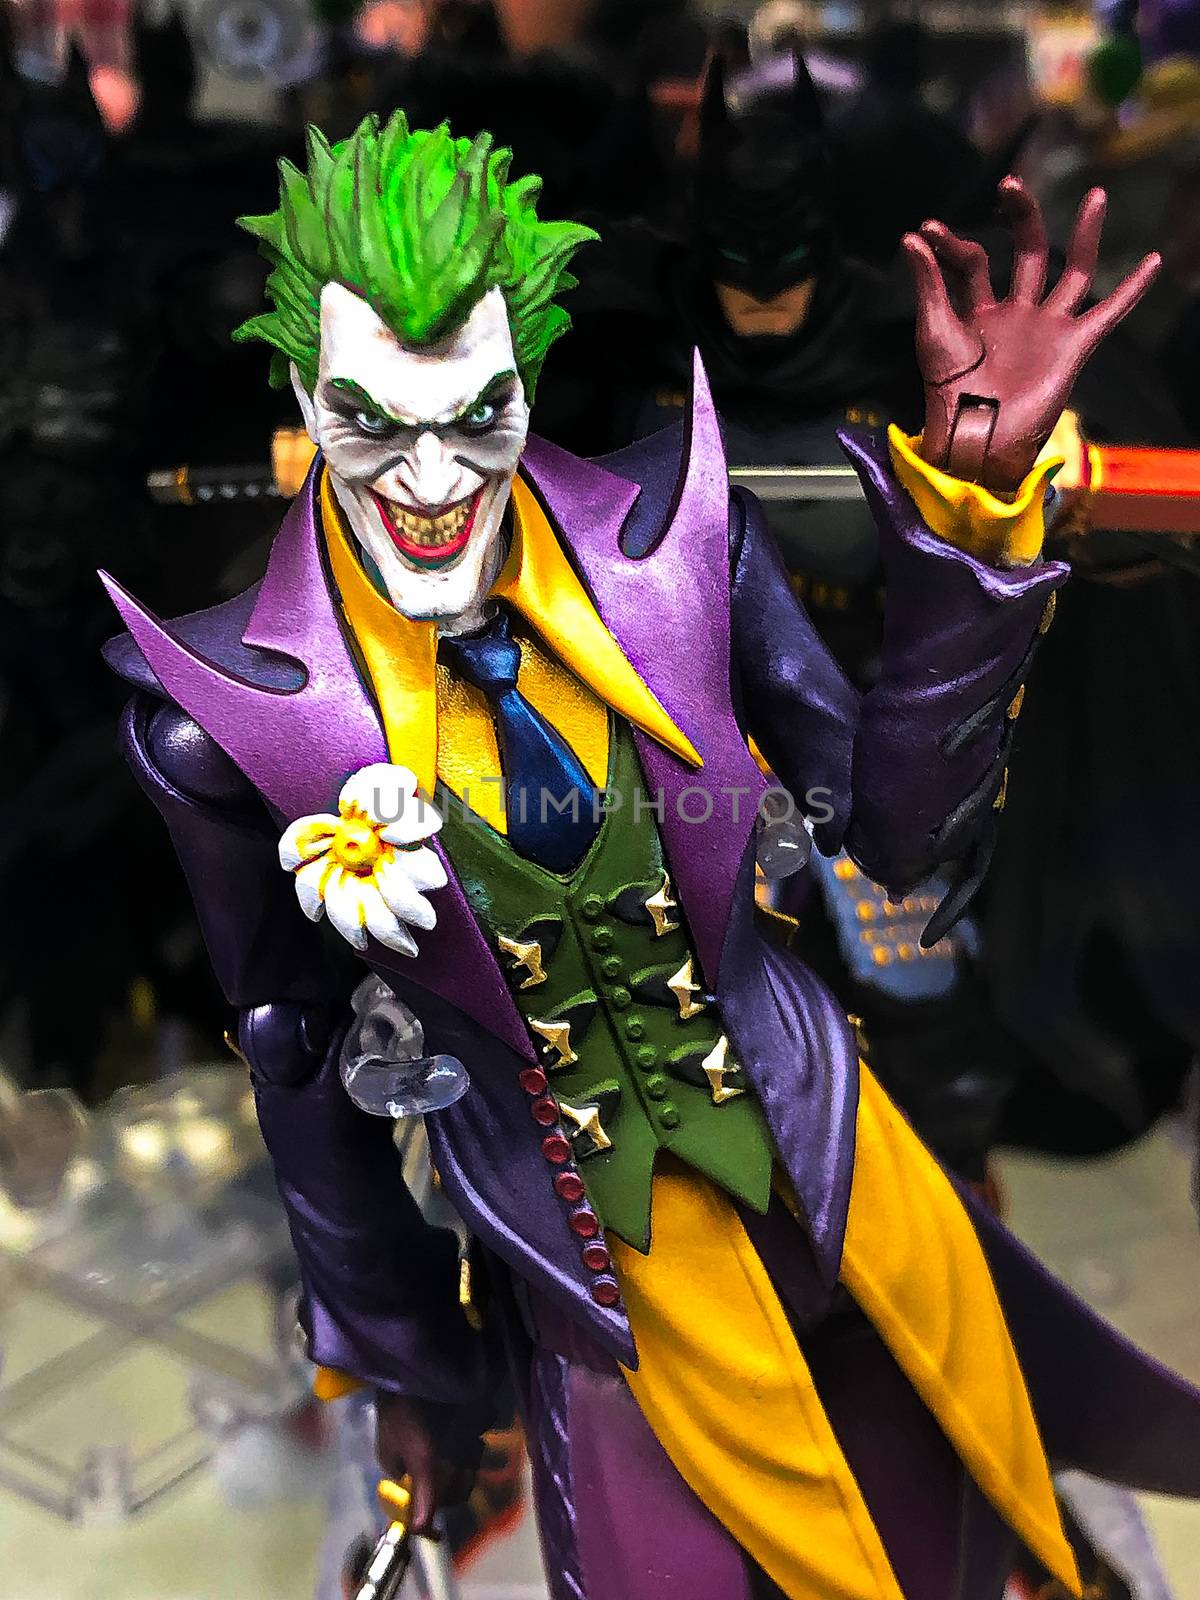 Osaka, Japan - Apr 23, 2019: Focused on fictional character figure from Arkham Asylum Joker figure out of toys shop. by USA-TARO